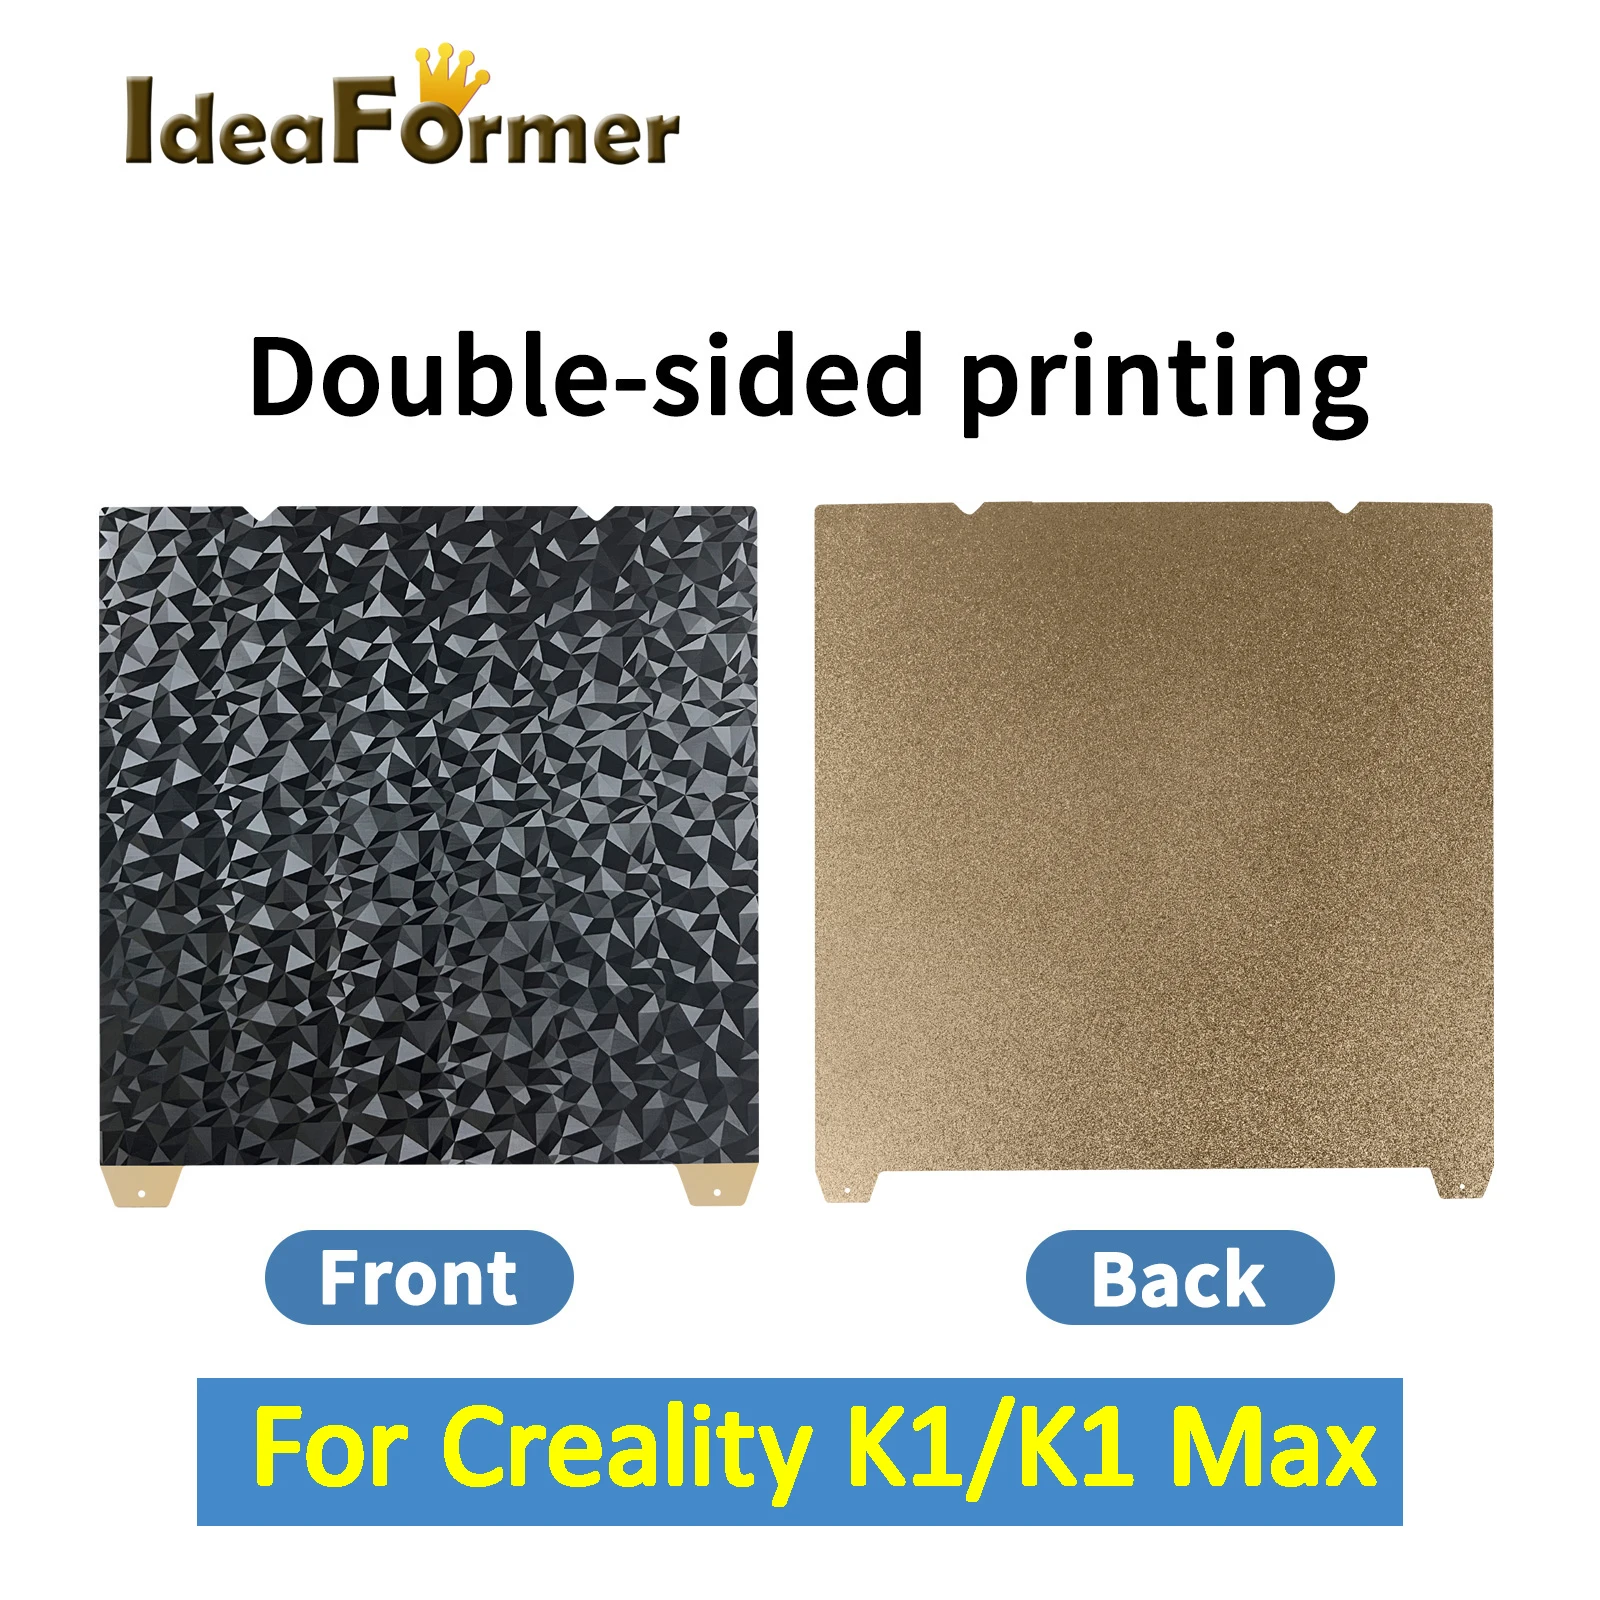 For Creality K1 Build Plate 235x235mm 315x310mm Smooth PEO Textured PEI Sheet Double Sided Printing for K1 K1 Max Build Plate